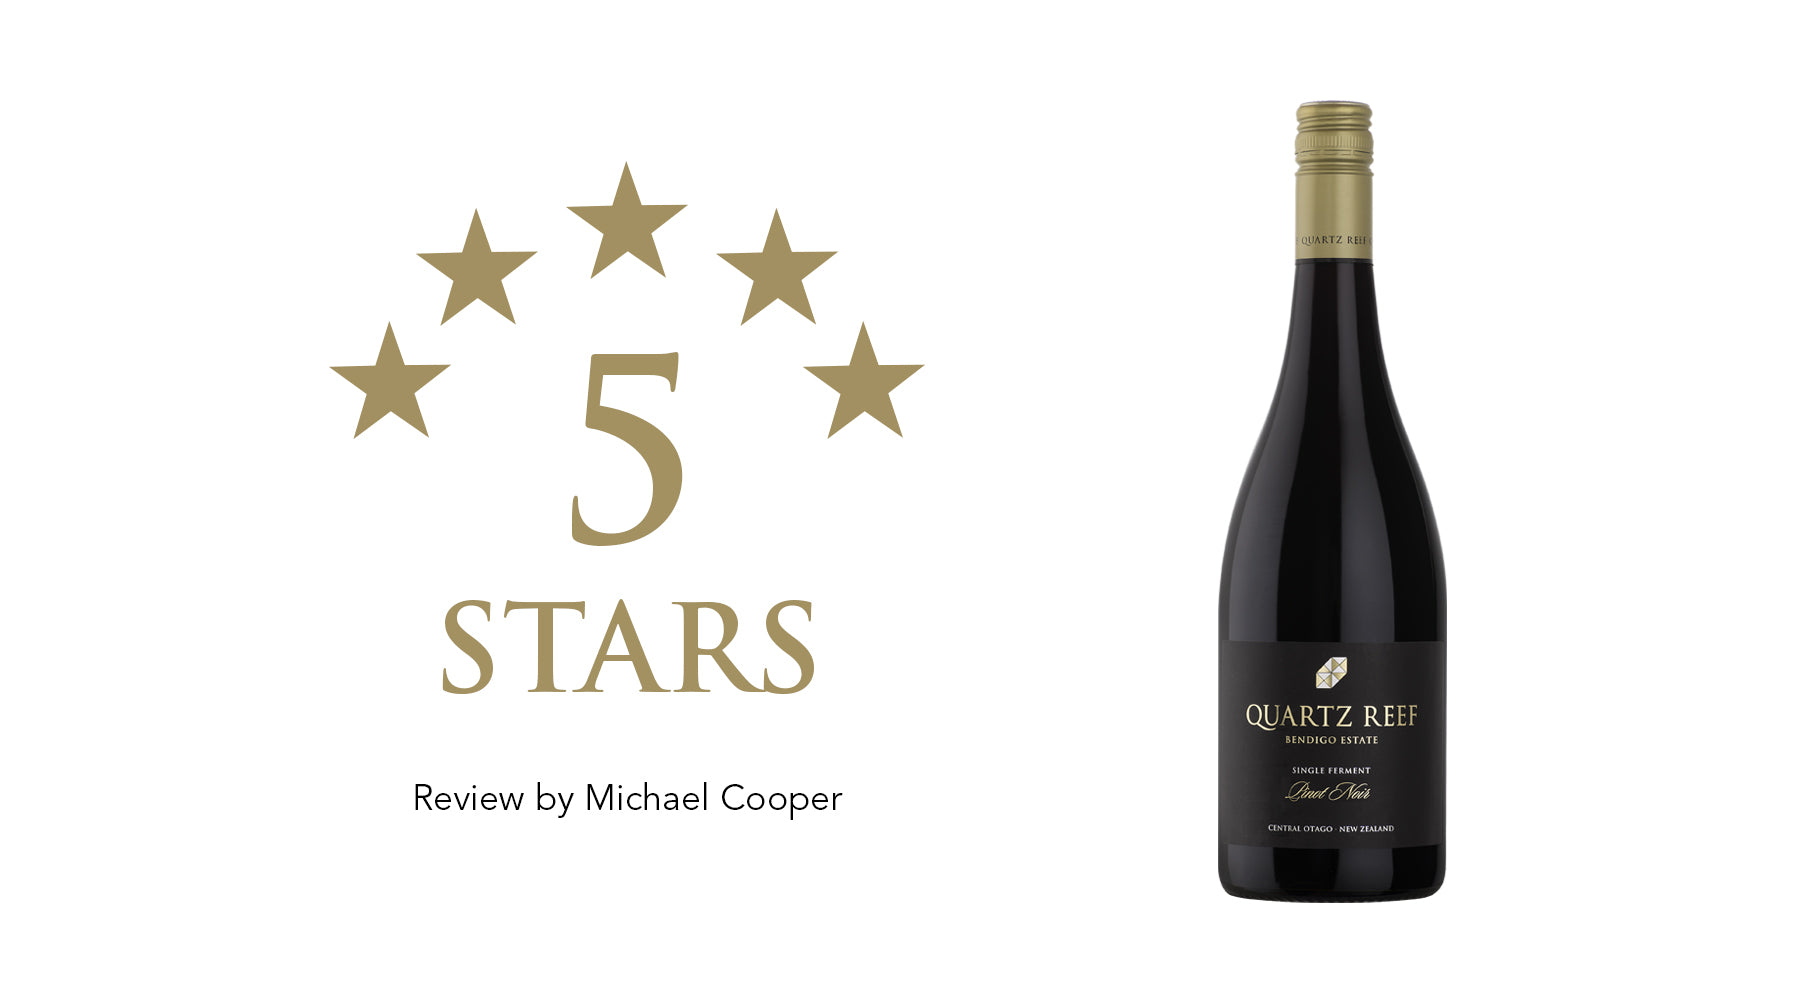 Single Ferment Pinot Noir 2018 - Awarded 5 Stars and Super Classic